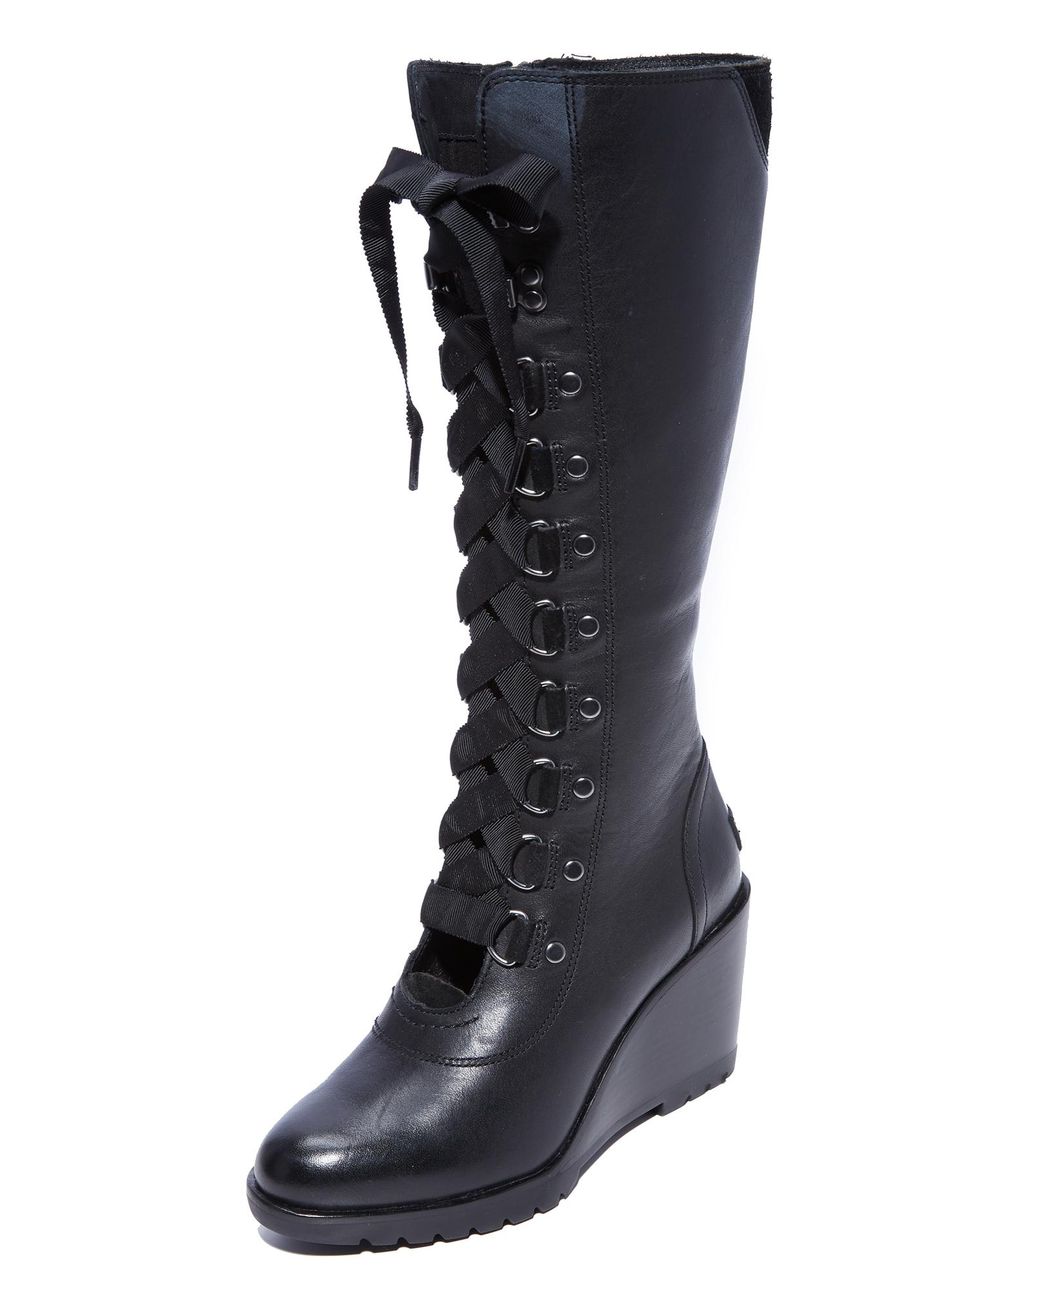 Sorel After Hours Tall Wedge Boots in Black | Lyst